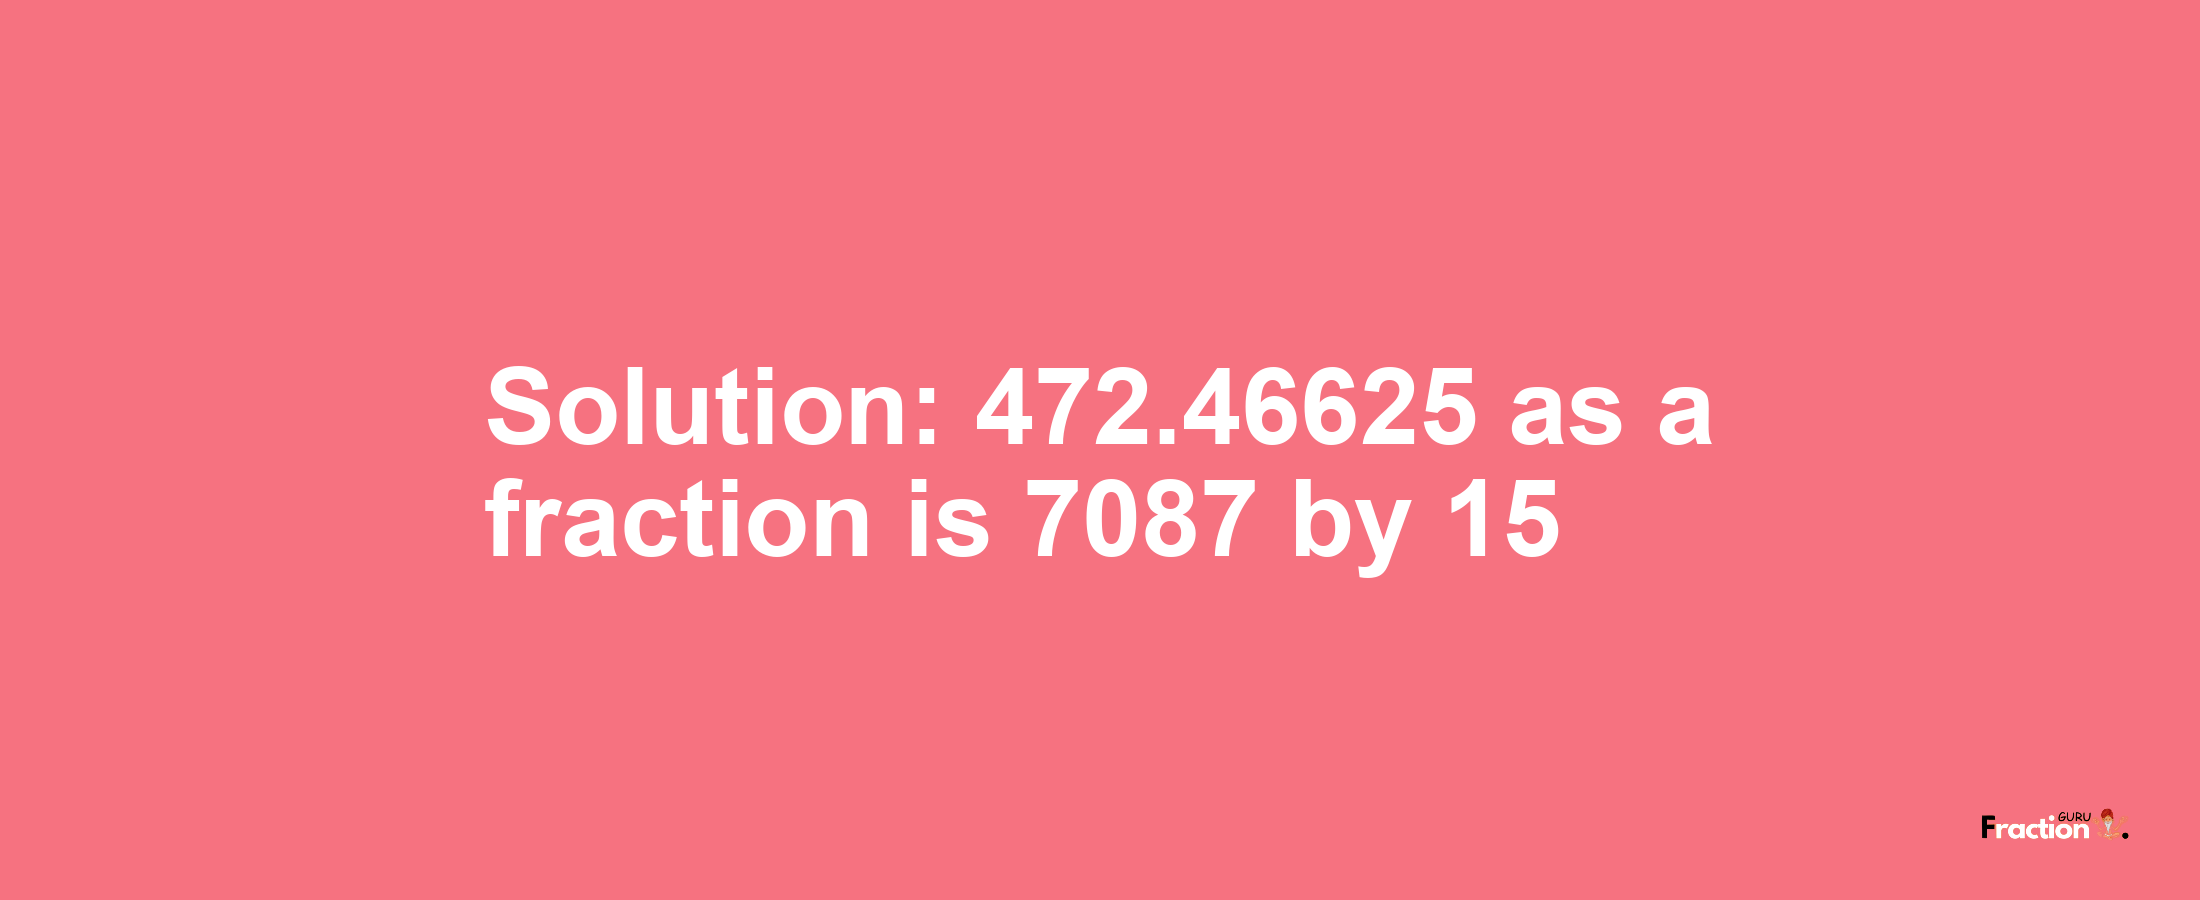 Solution:472.46625 as a fraction is 7087/15